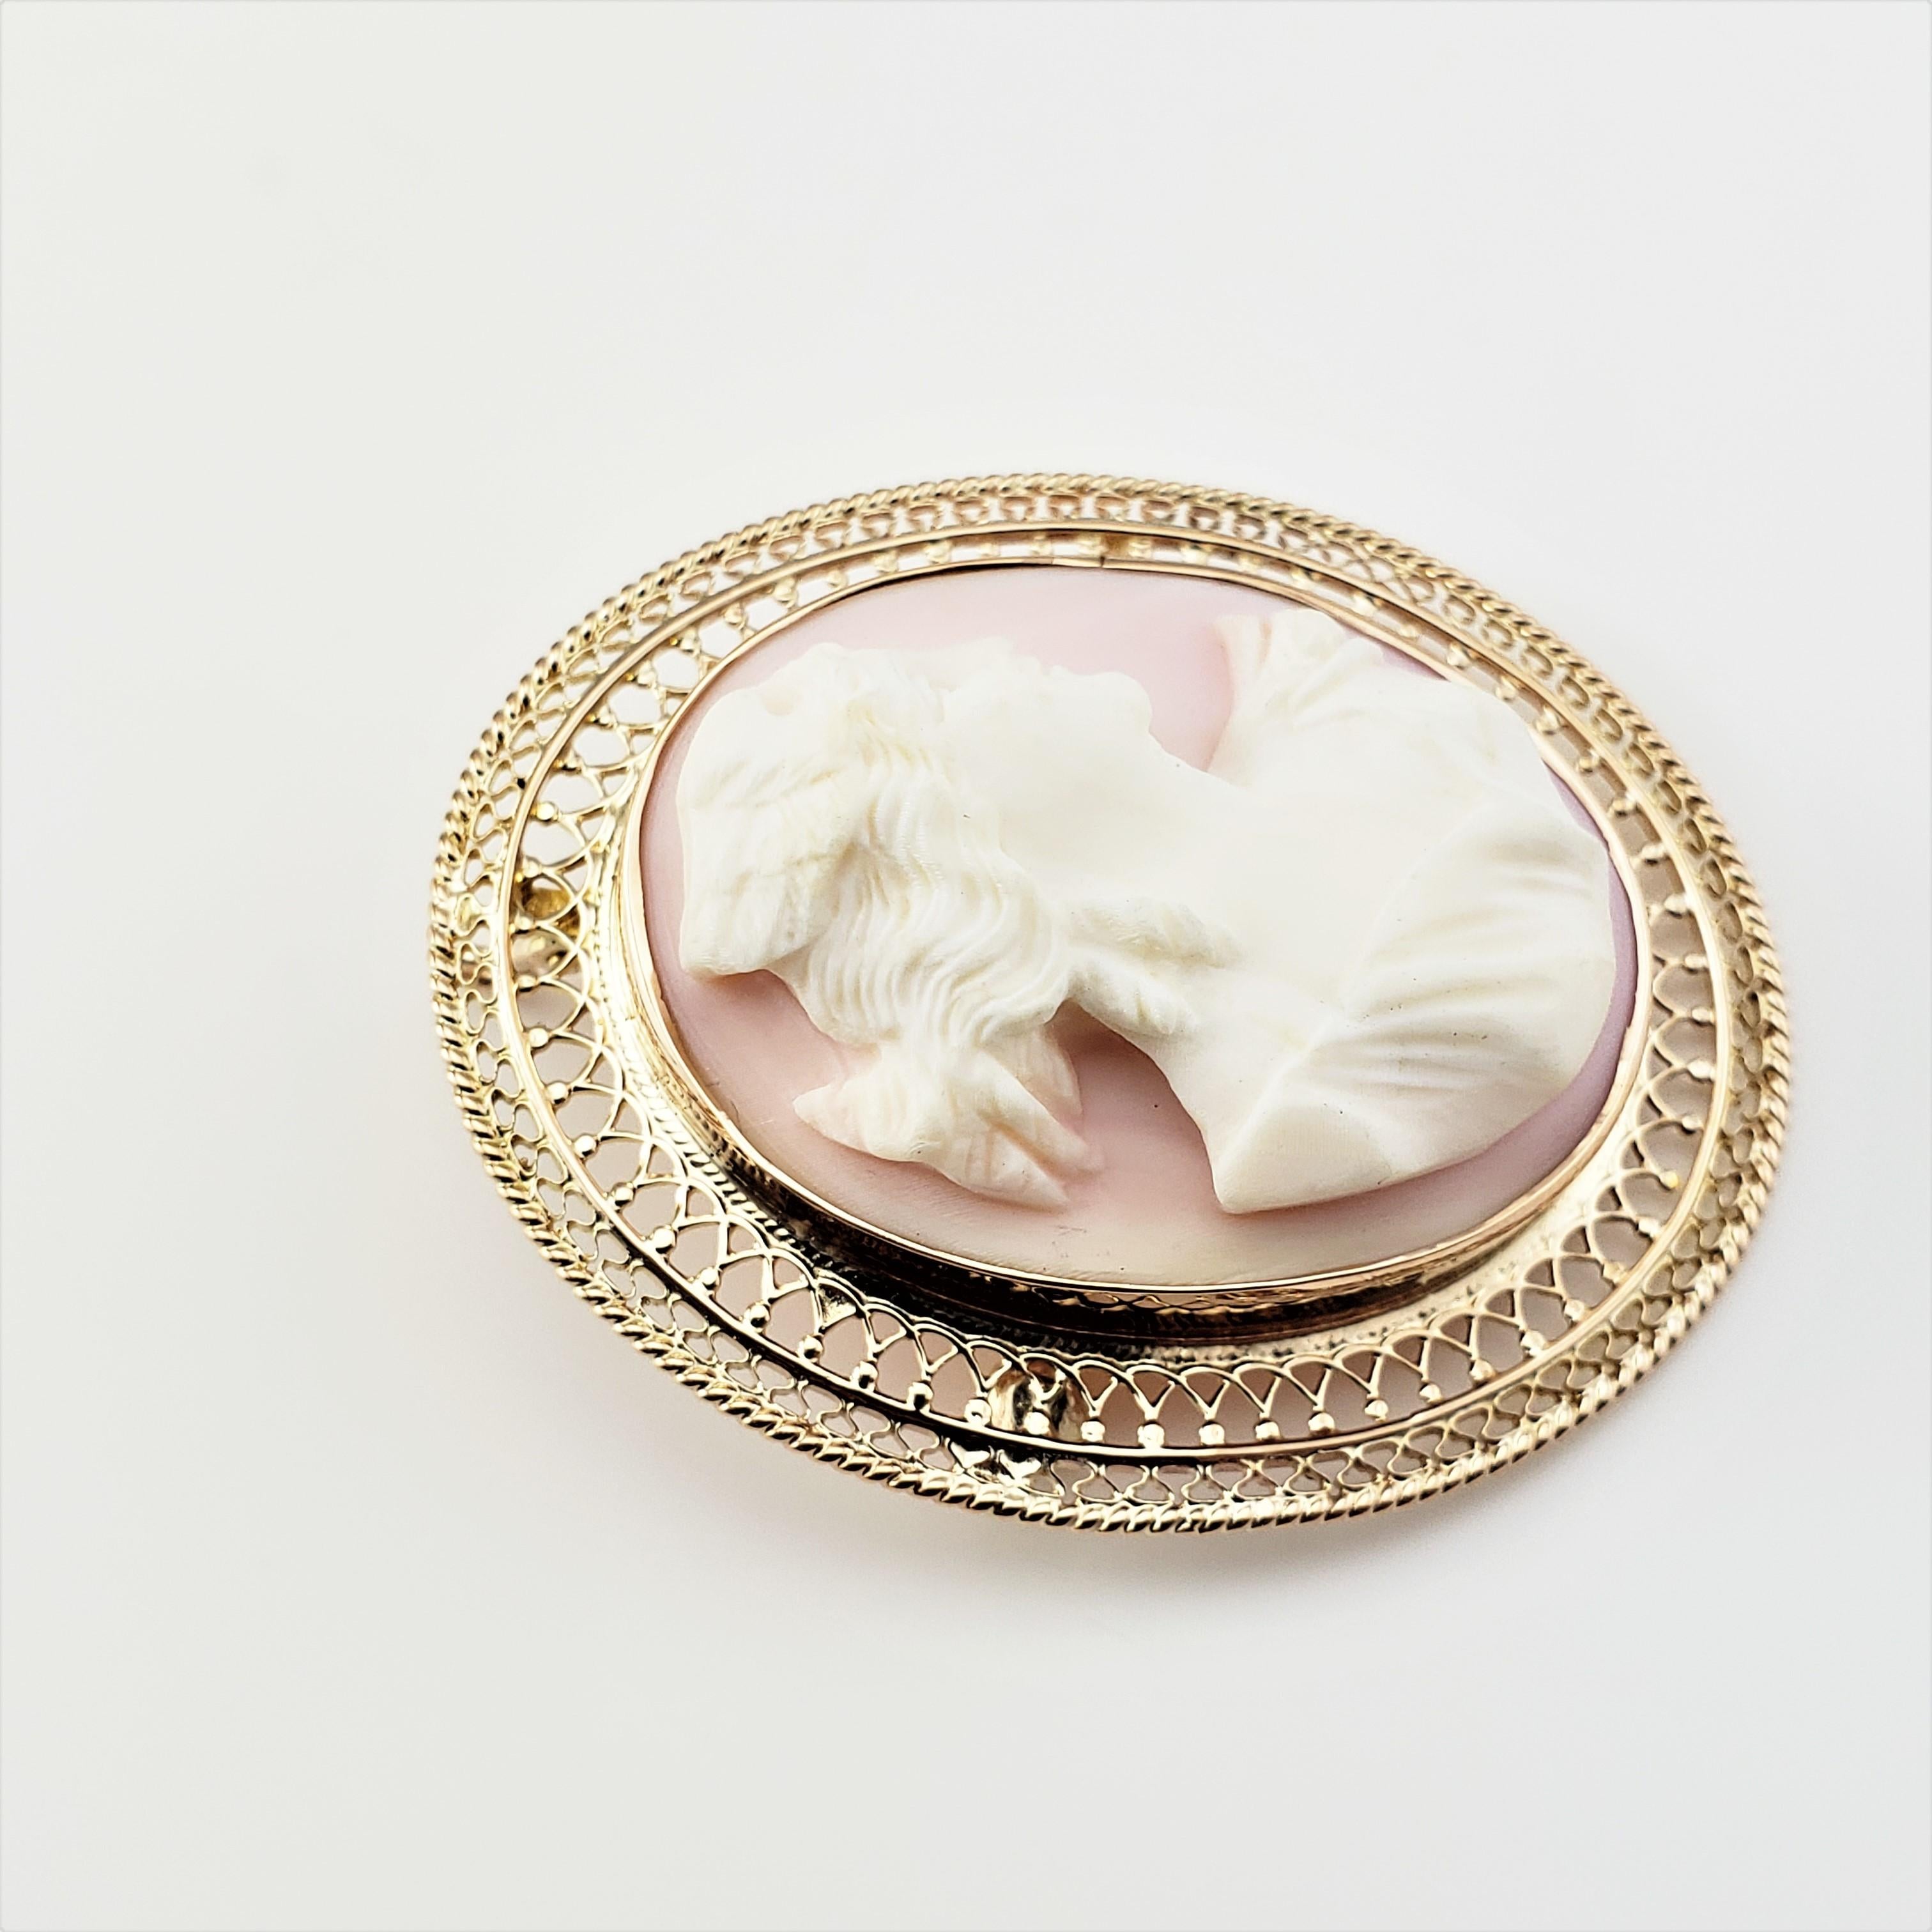 10 Karat Yellow Gold Pink Cameo Brooch/Pendant-

This elegant pink cameo features a lovely lady in profile framed in beautifully detailed 10K yellow gold filigree.  Can be worn as a brooch or a pendant.

*Chain not included

Size:  40 mm x 35 